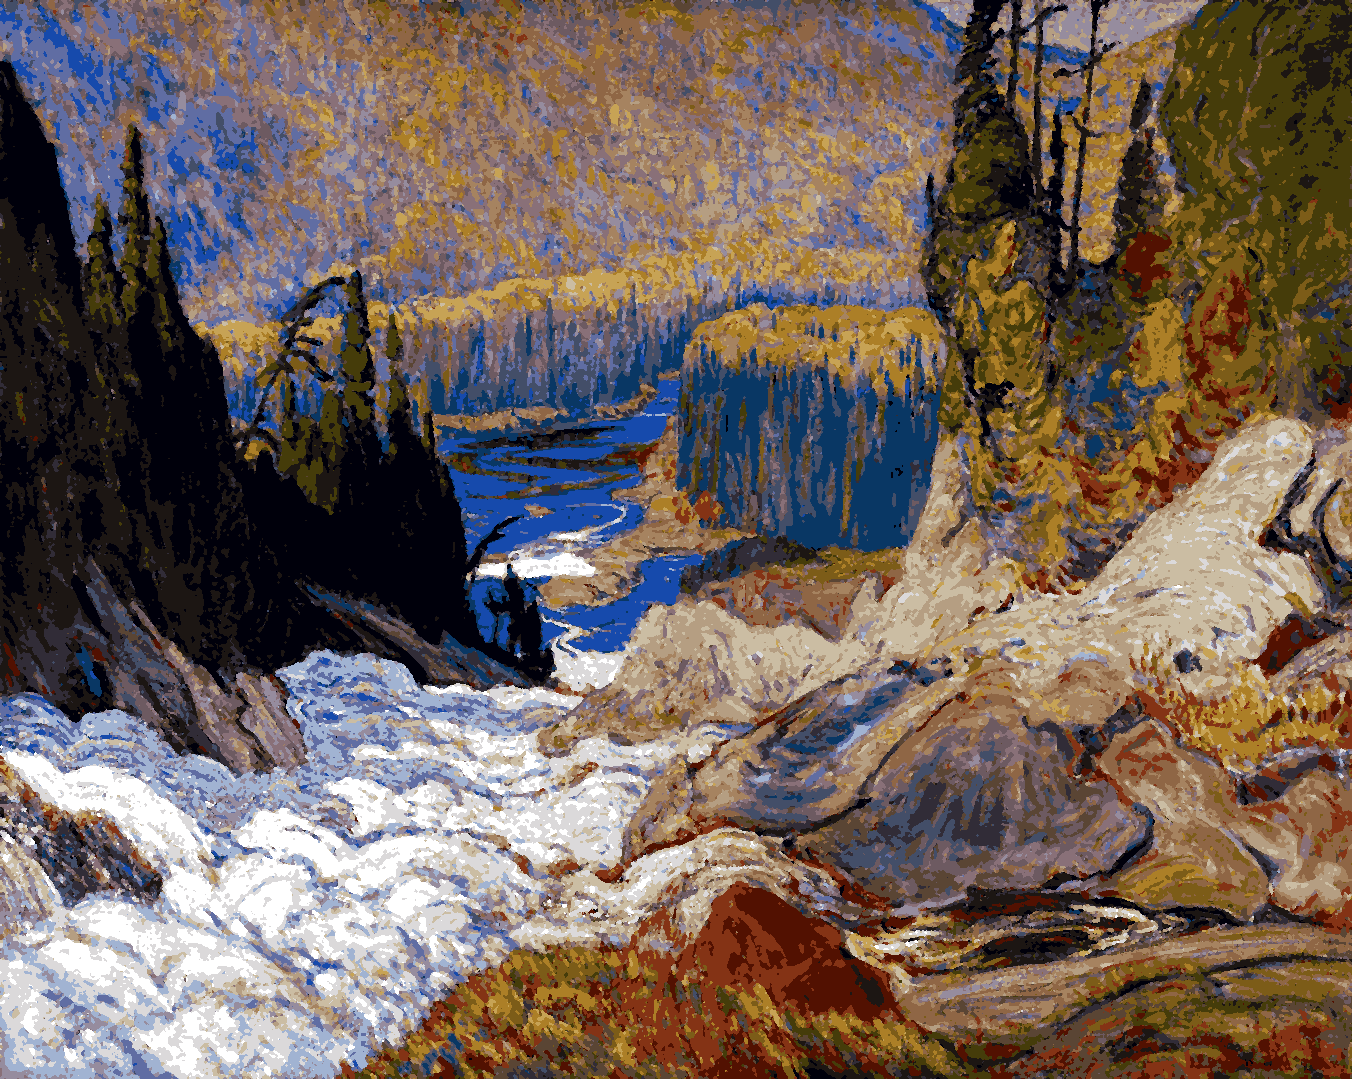 Falls, Montreal River by James Edward - Van-Go Paint-By-Number Kit